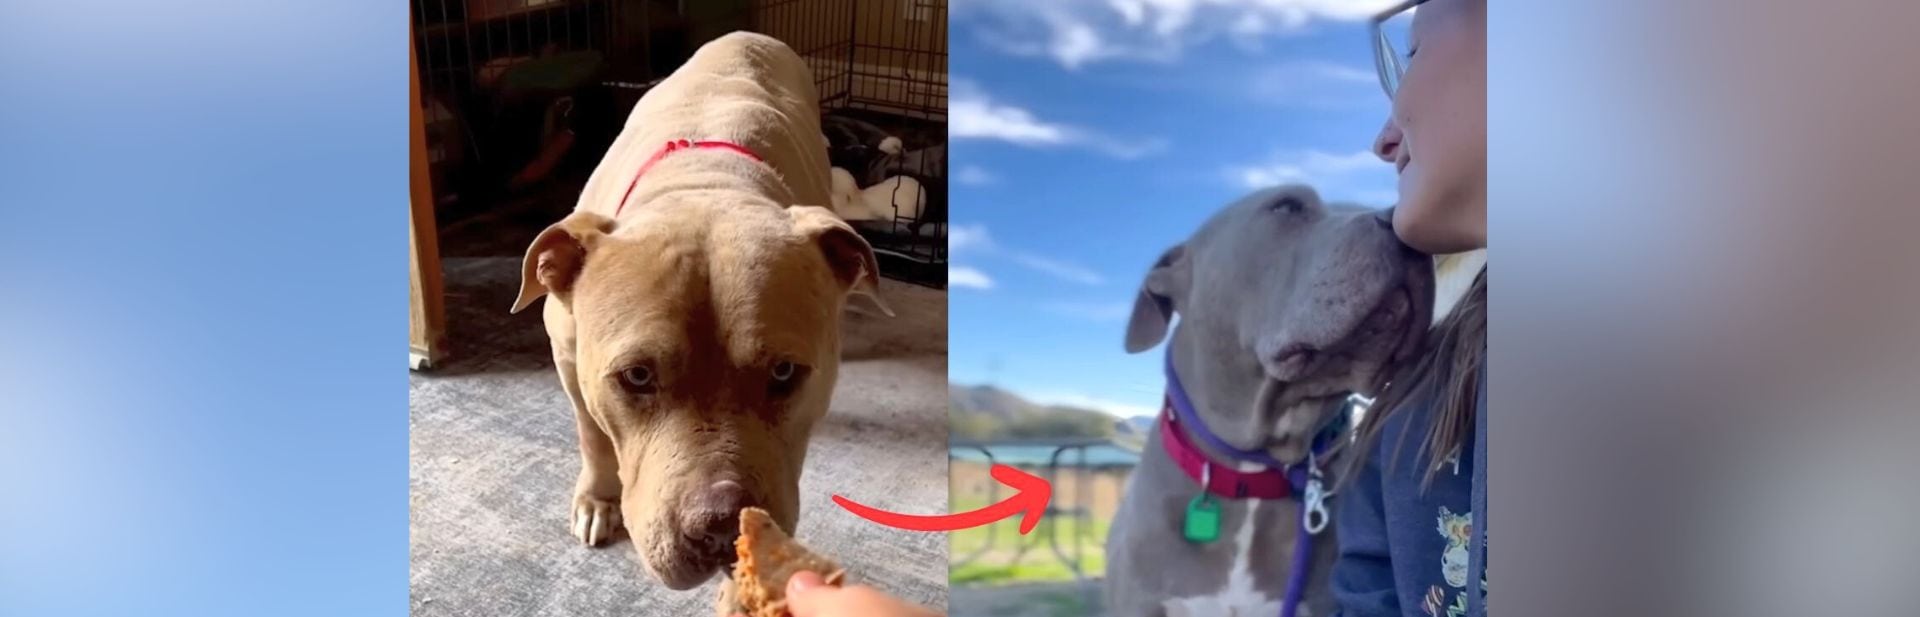 Scared Shelter Dog Learns to Walk Again With a Little Help and Lots of Love